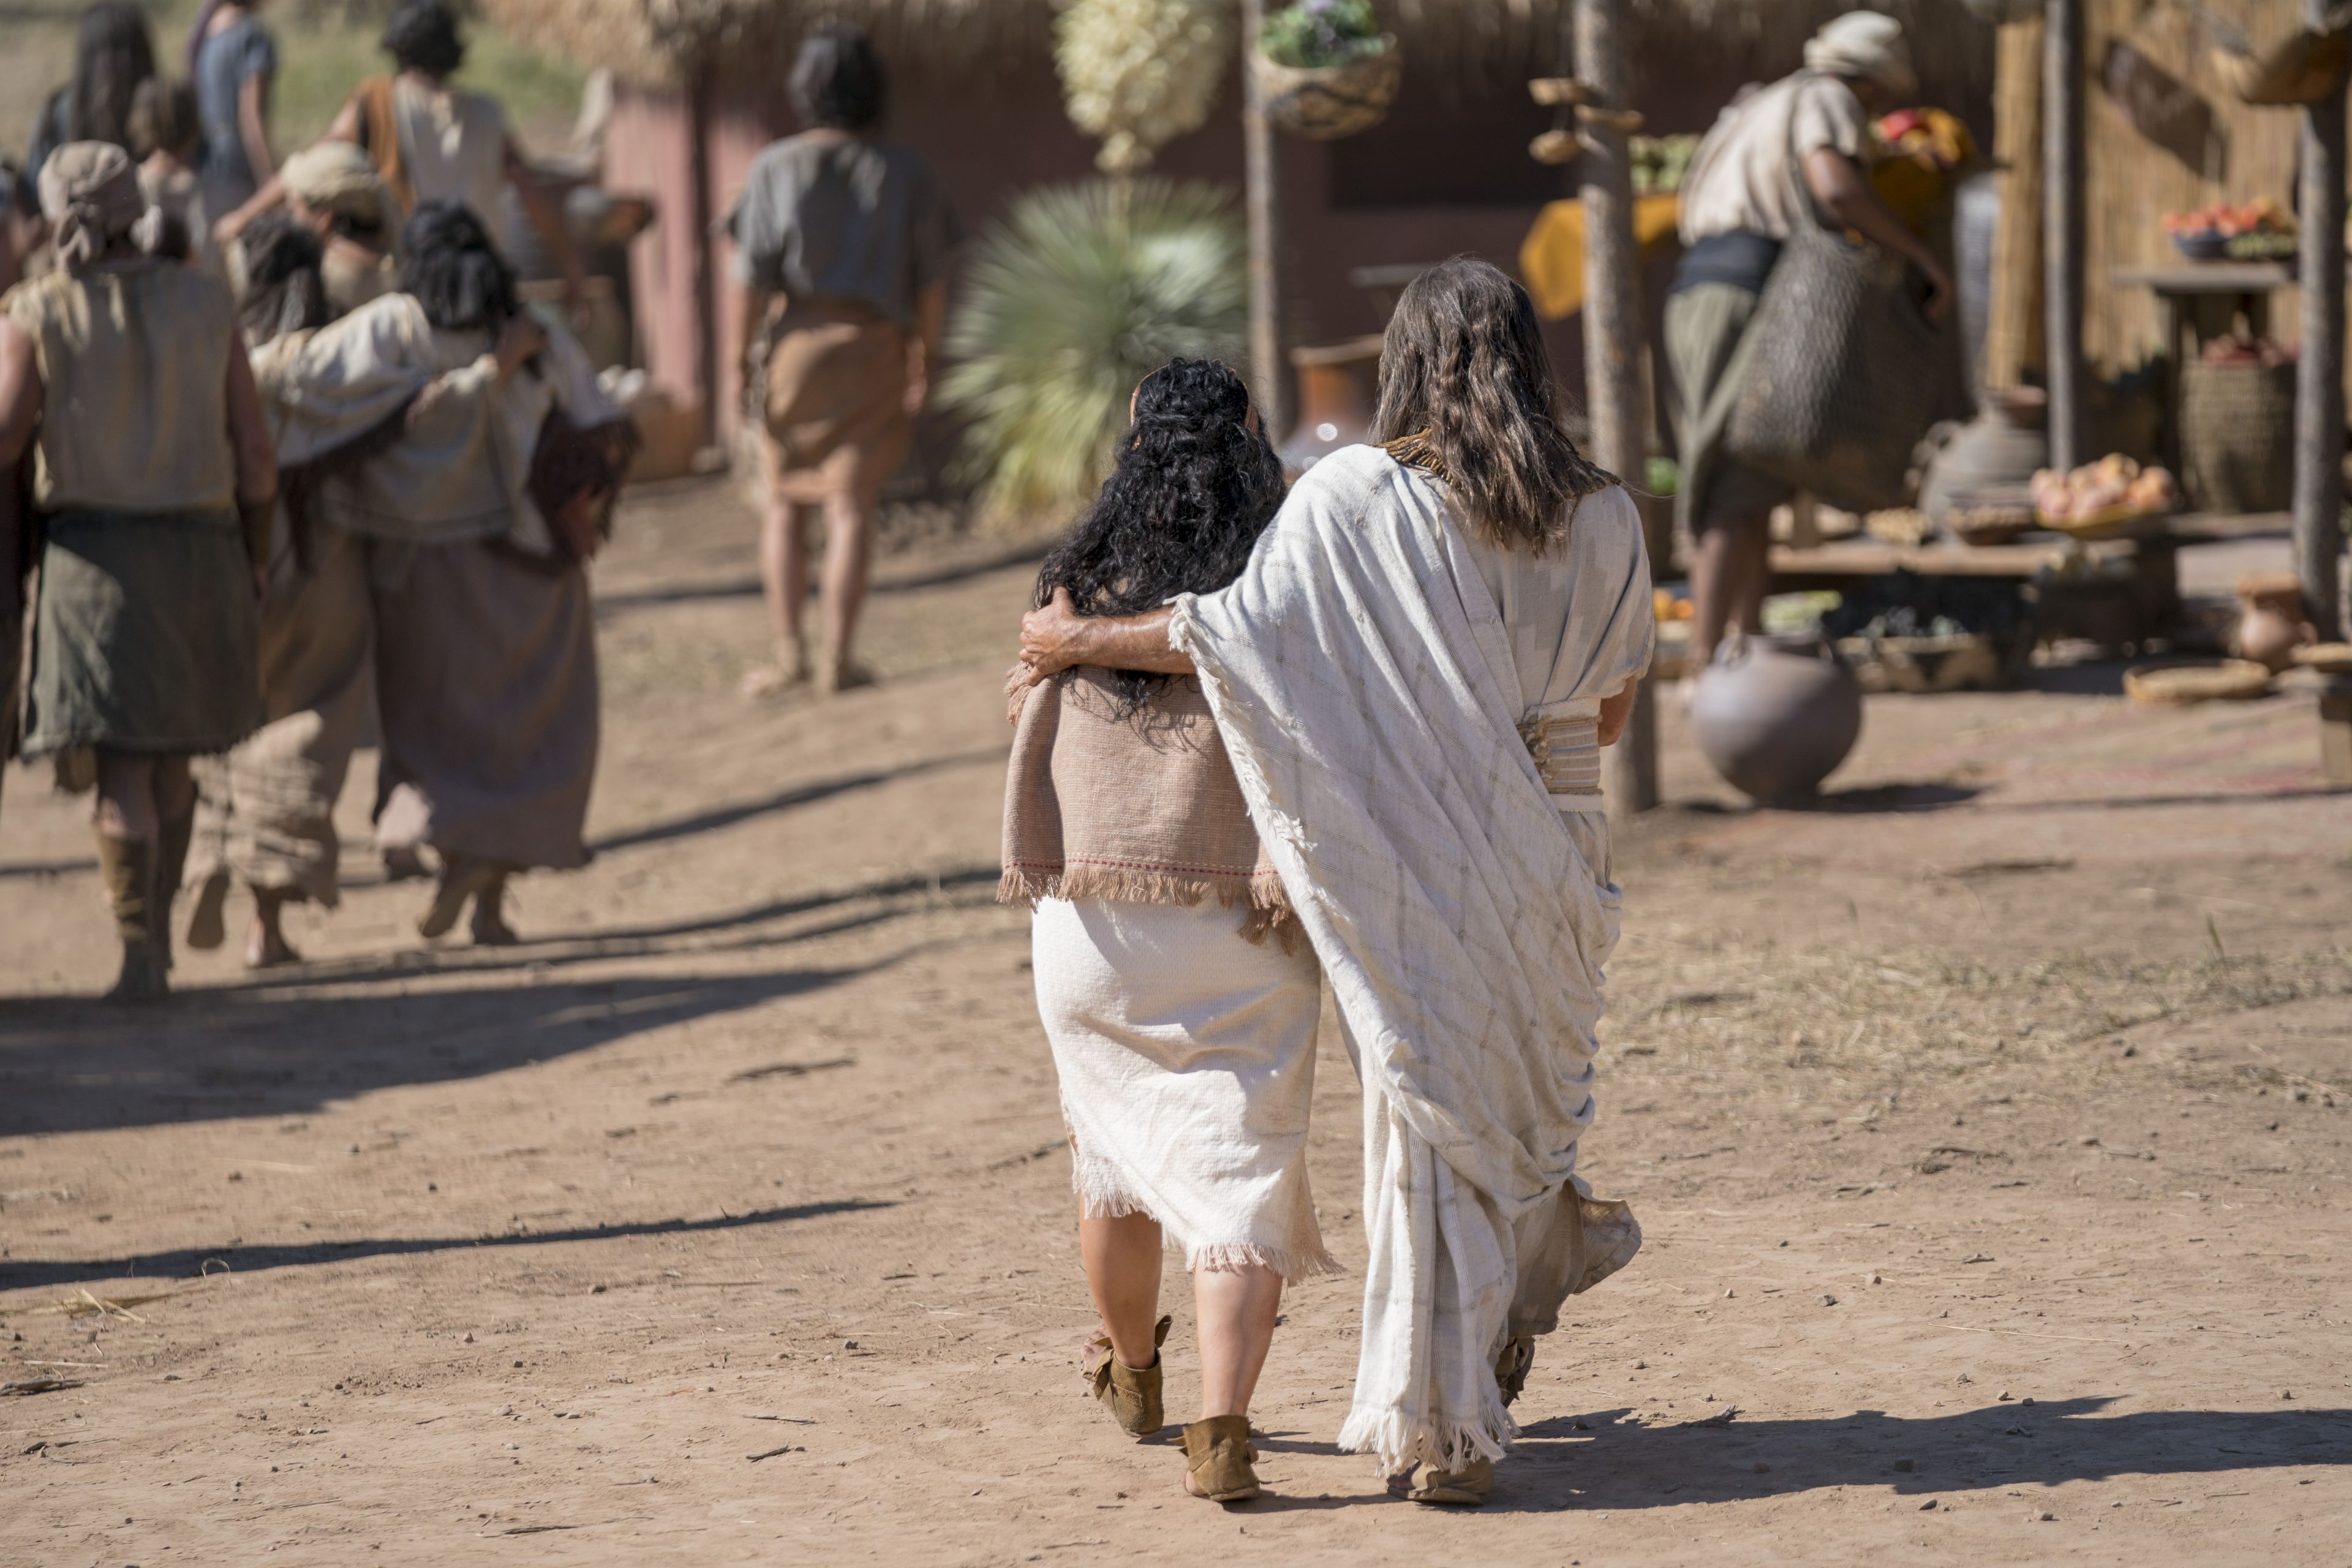 Jacob walks with his arm around his wife after teaching the Nephites.